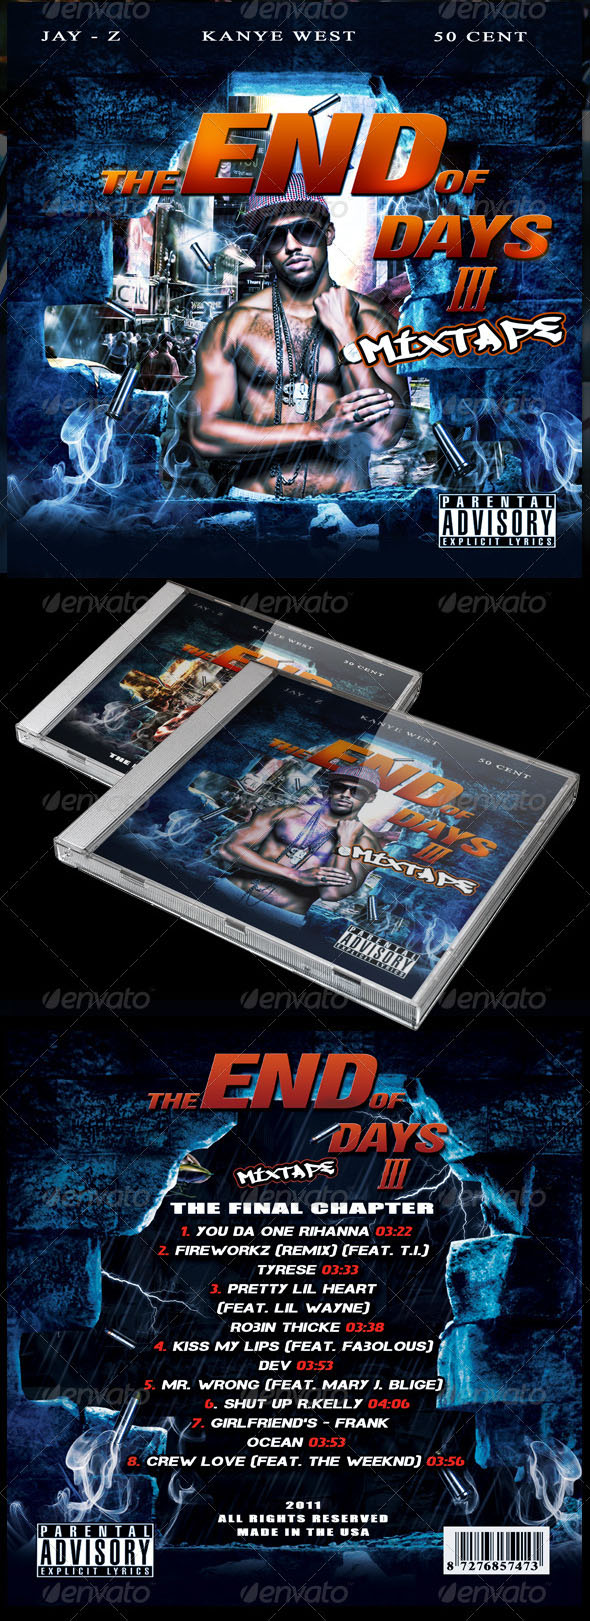 The End of Days III Mixtape CD Cover